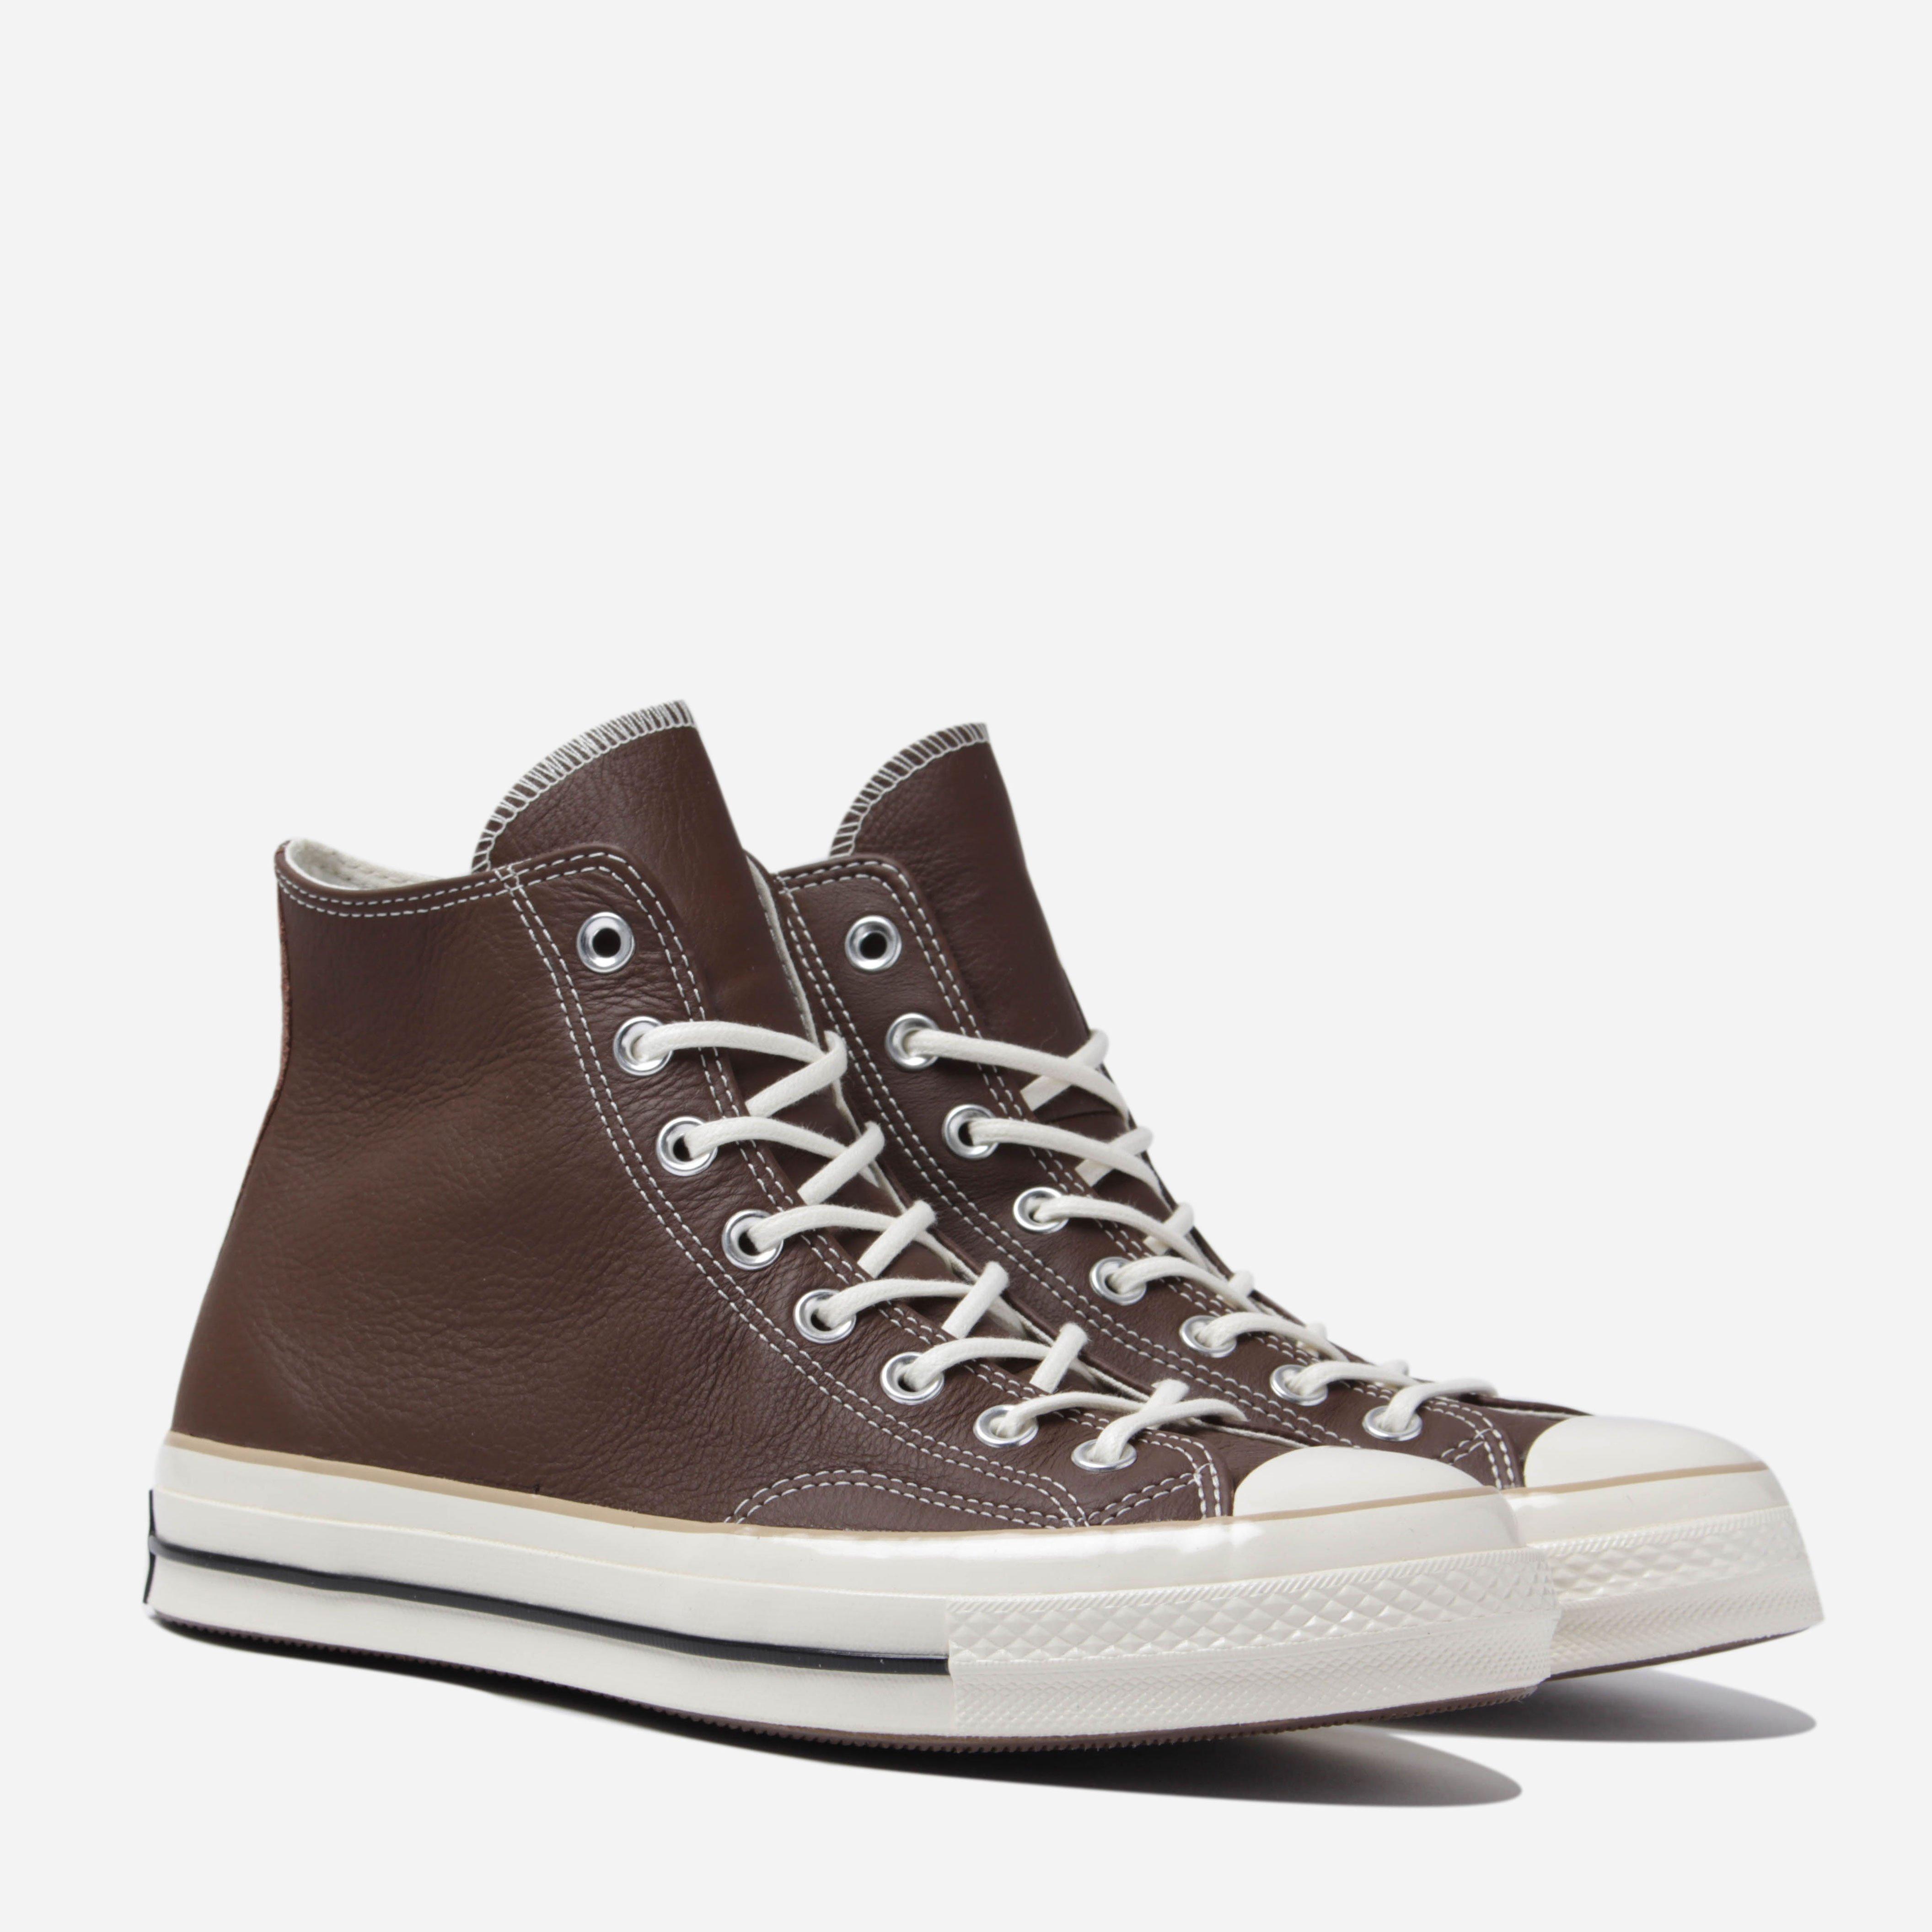 Converse Leather 162394c Chuck 70 in Brown for Men - Lyst